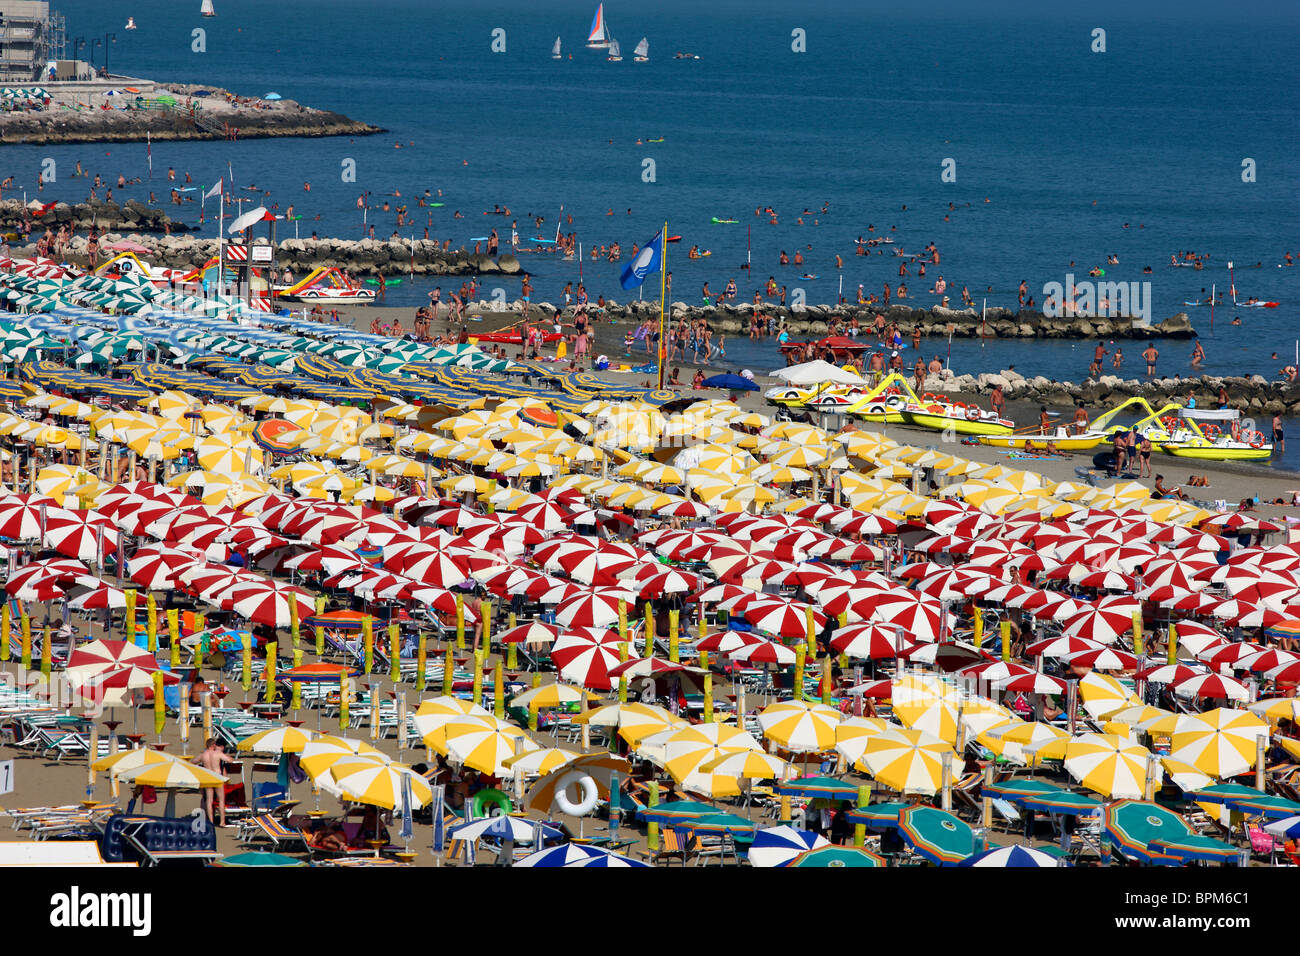 Mass tourism at the beach of Caorle, Adriatic Sea, Italy. Thousands of sun  chairs and beach umbrellas, parasols Stock Photo - Alamy